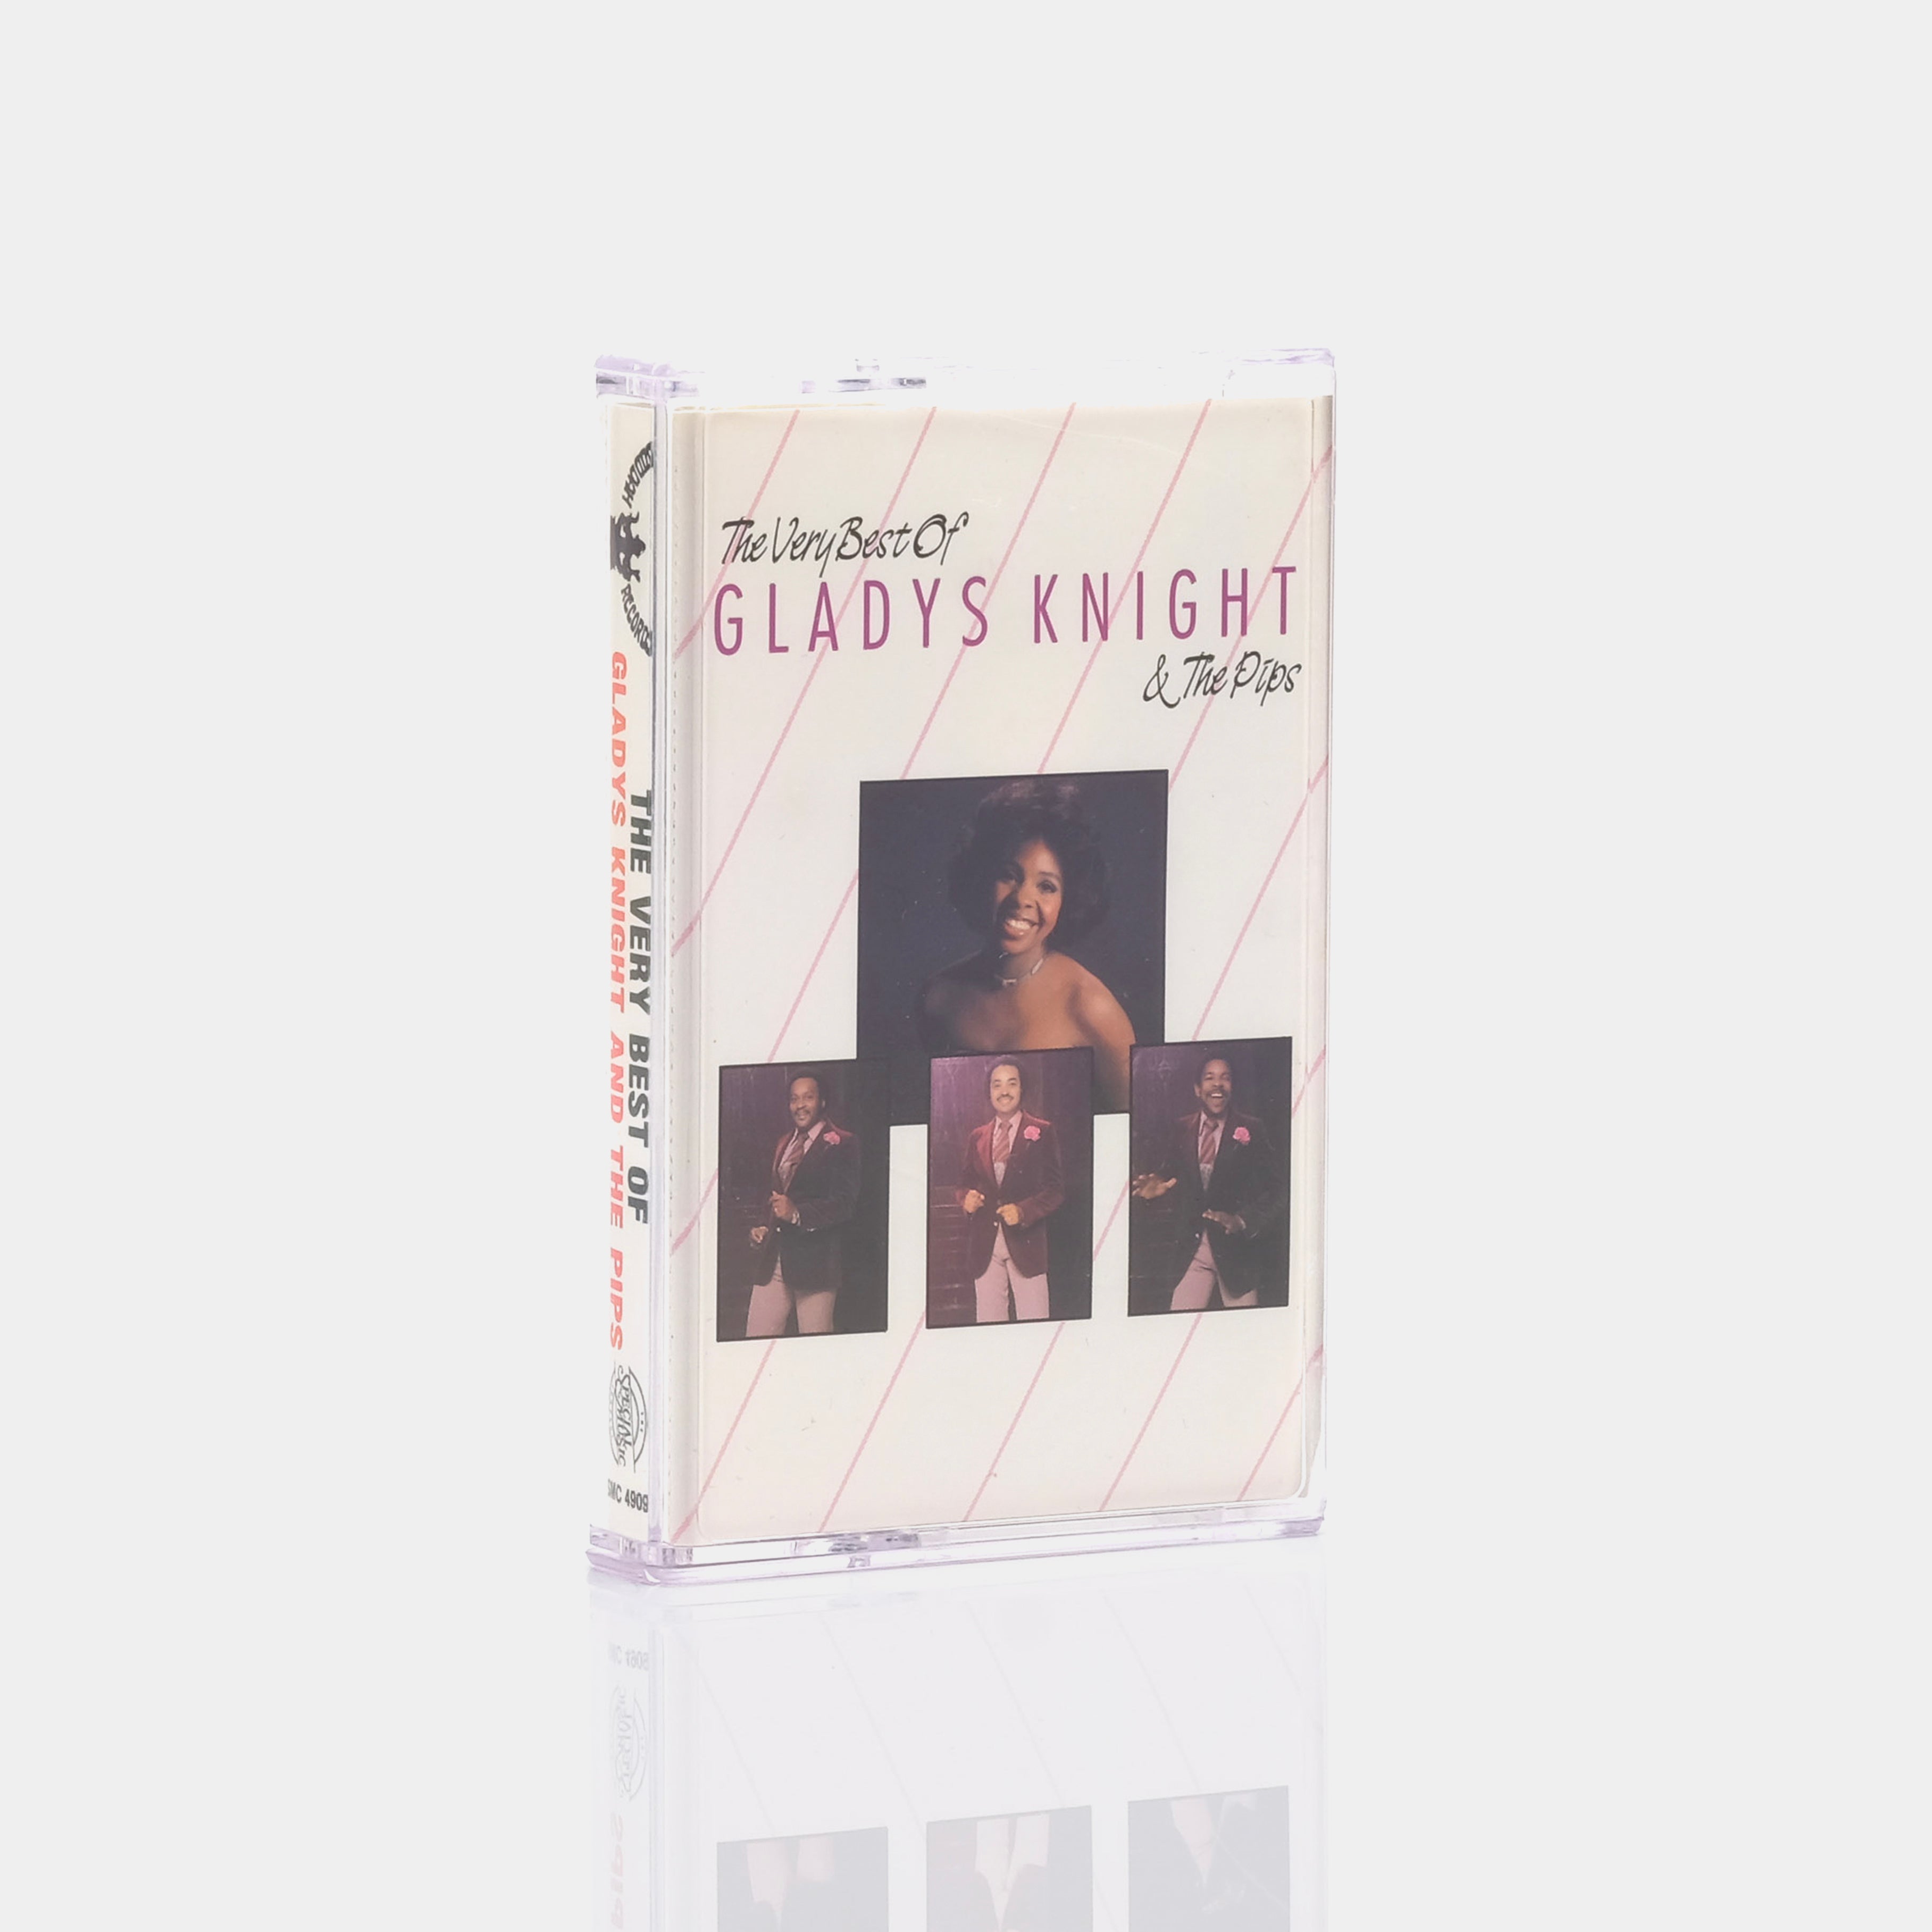 Gladys Knight & The Pips - The Very Best Of Gladys Knight & The Pips Cassette Tape